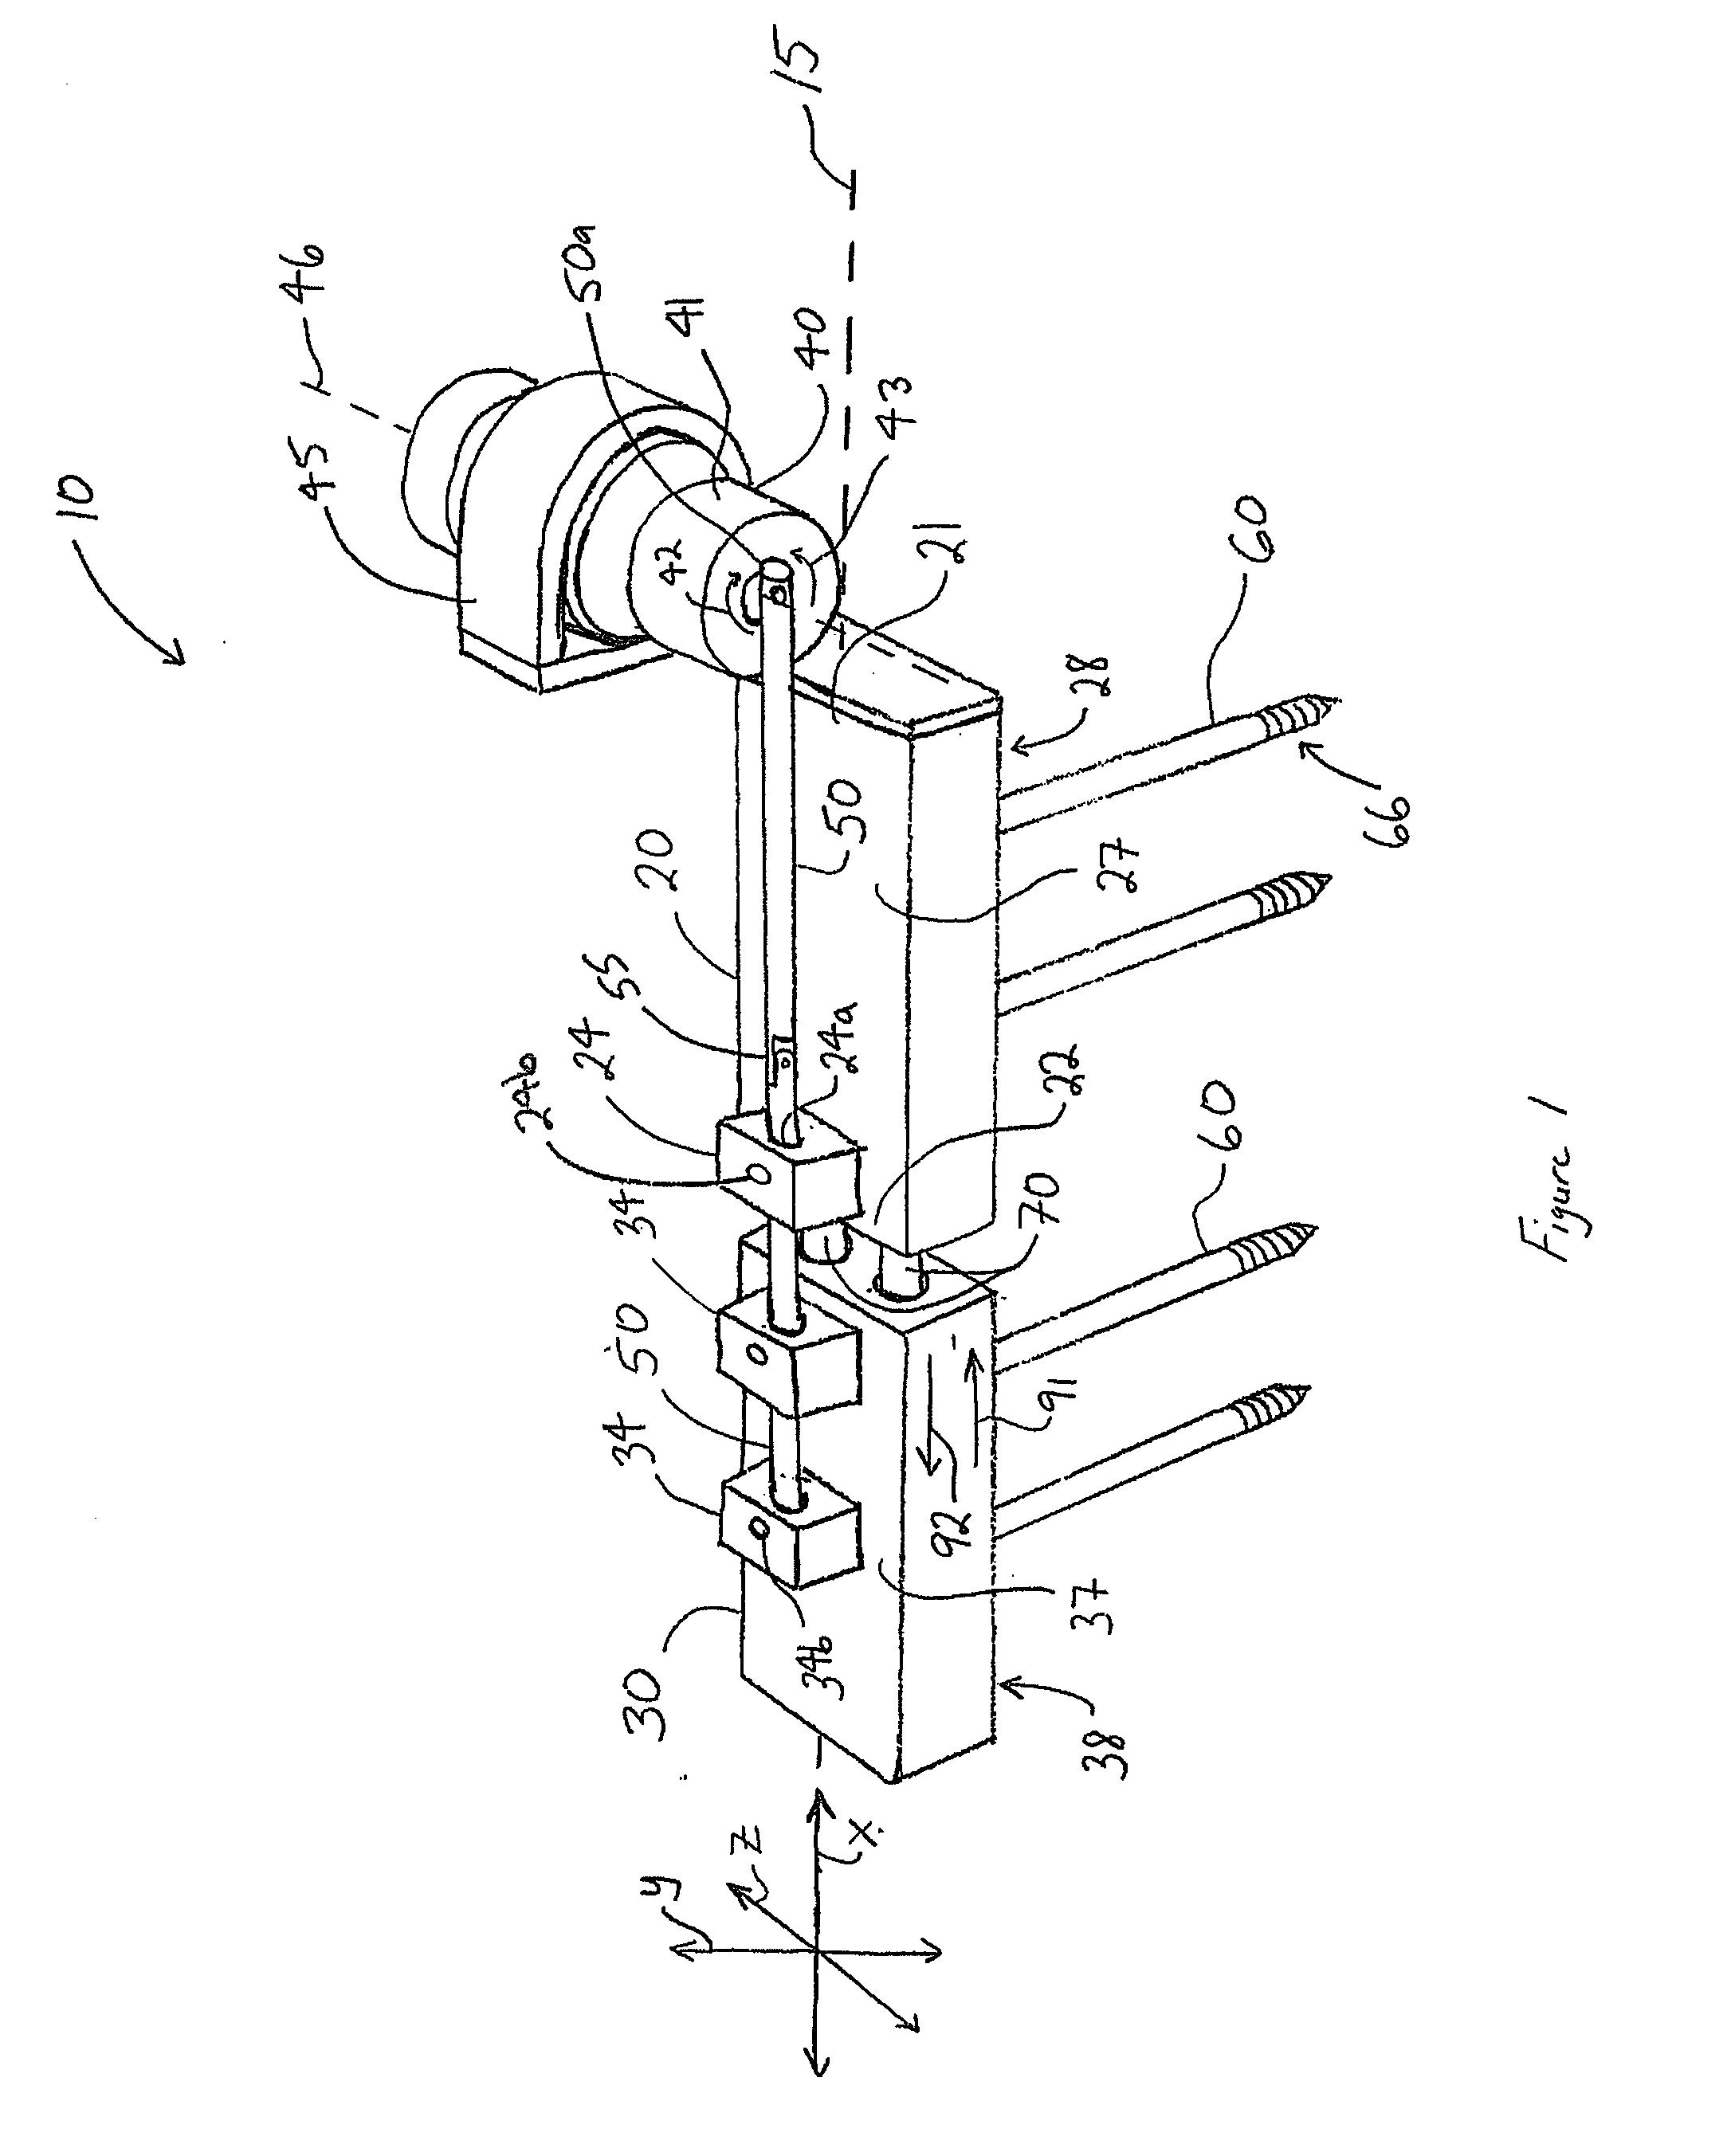 Bone fixation and dynamization devices and methods